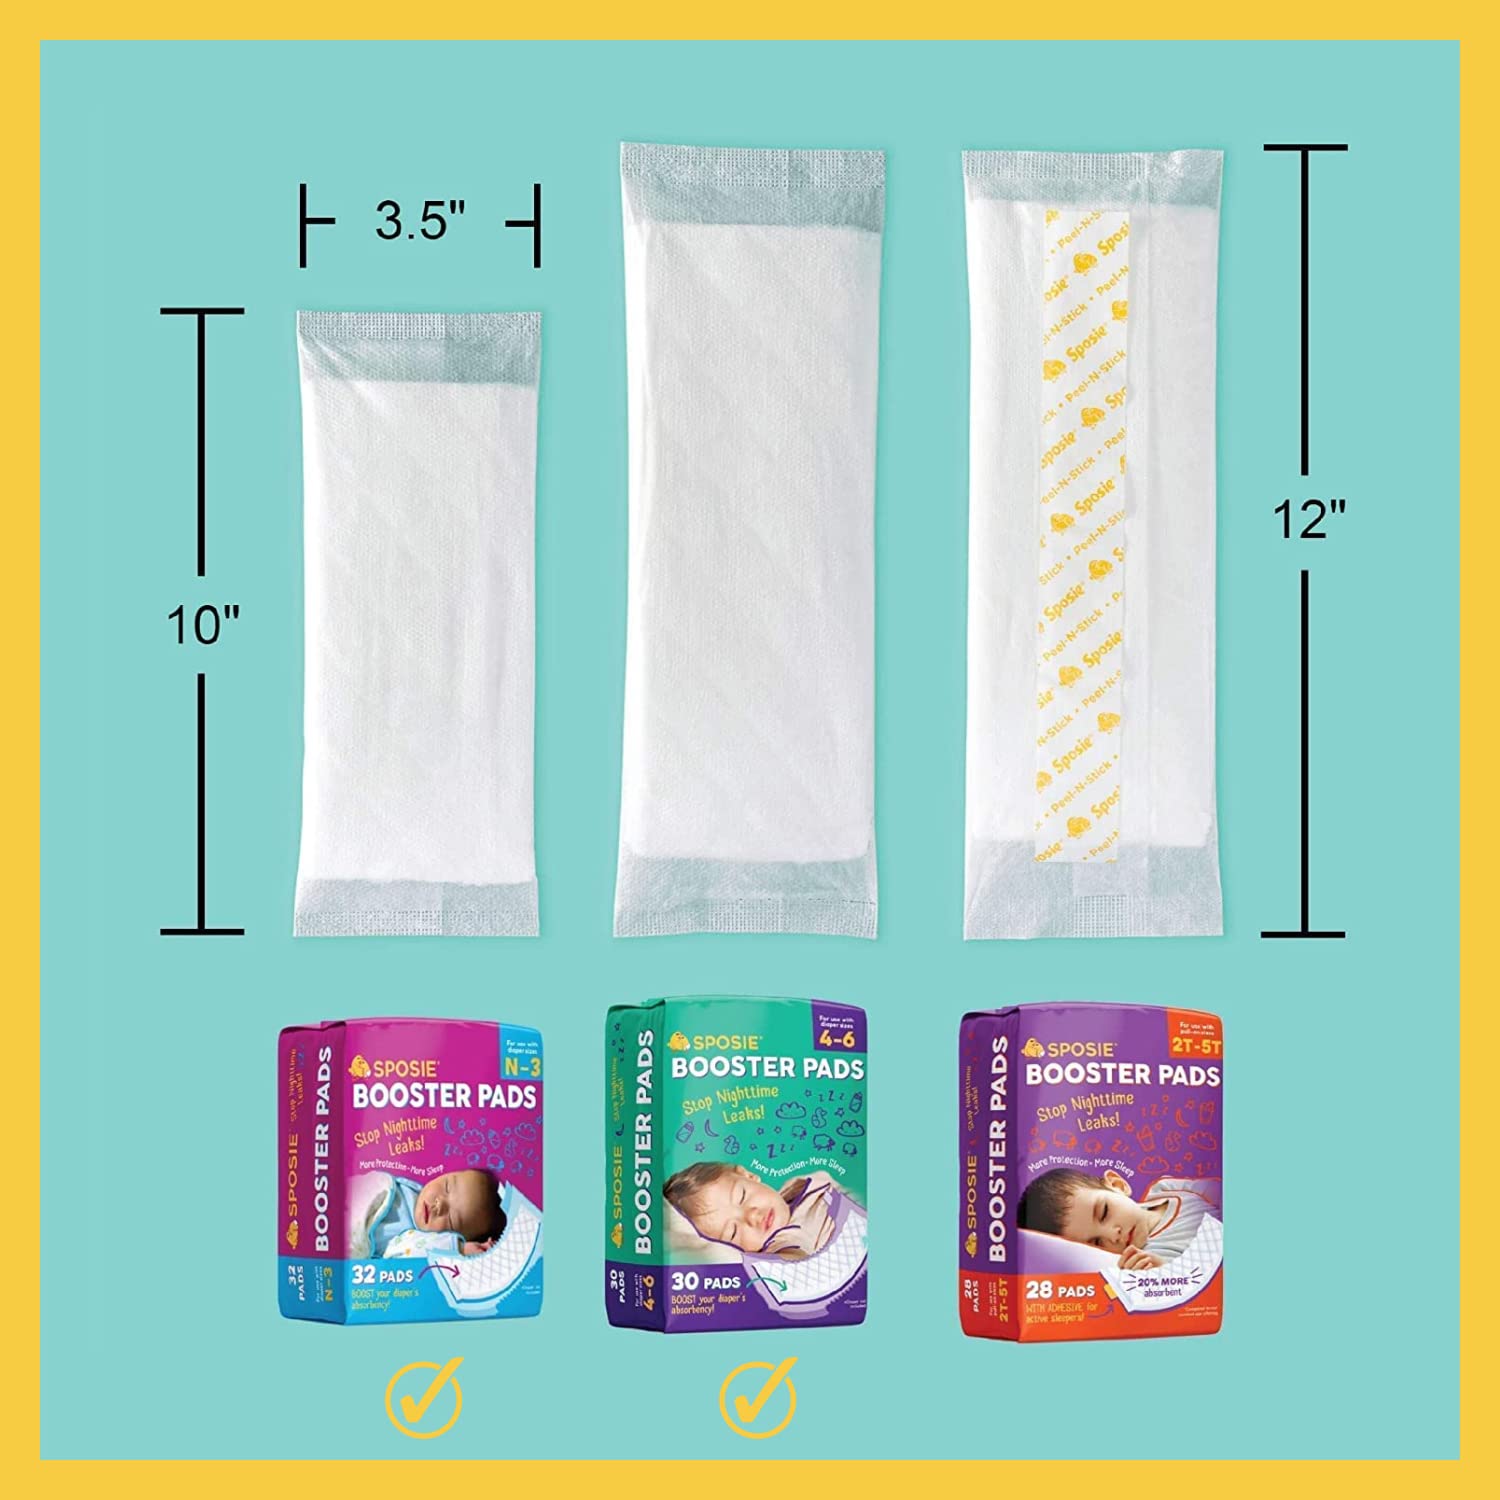 Sposie Diaper Booster Pads Gift Bundle for Girls and Boys | Overnight Diaper Leak Protection for Your Baby That's in-Between Sizes | 122 Total Non-Adhesive Pads, Fits Newborn Diapers to Size 4-6